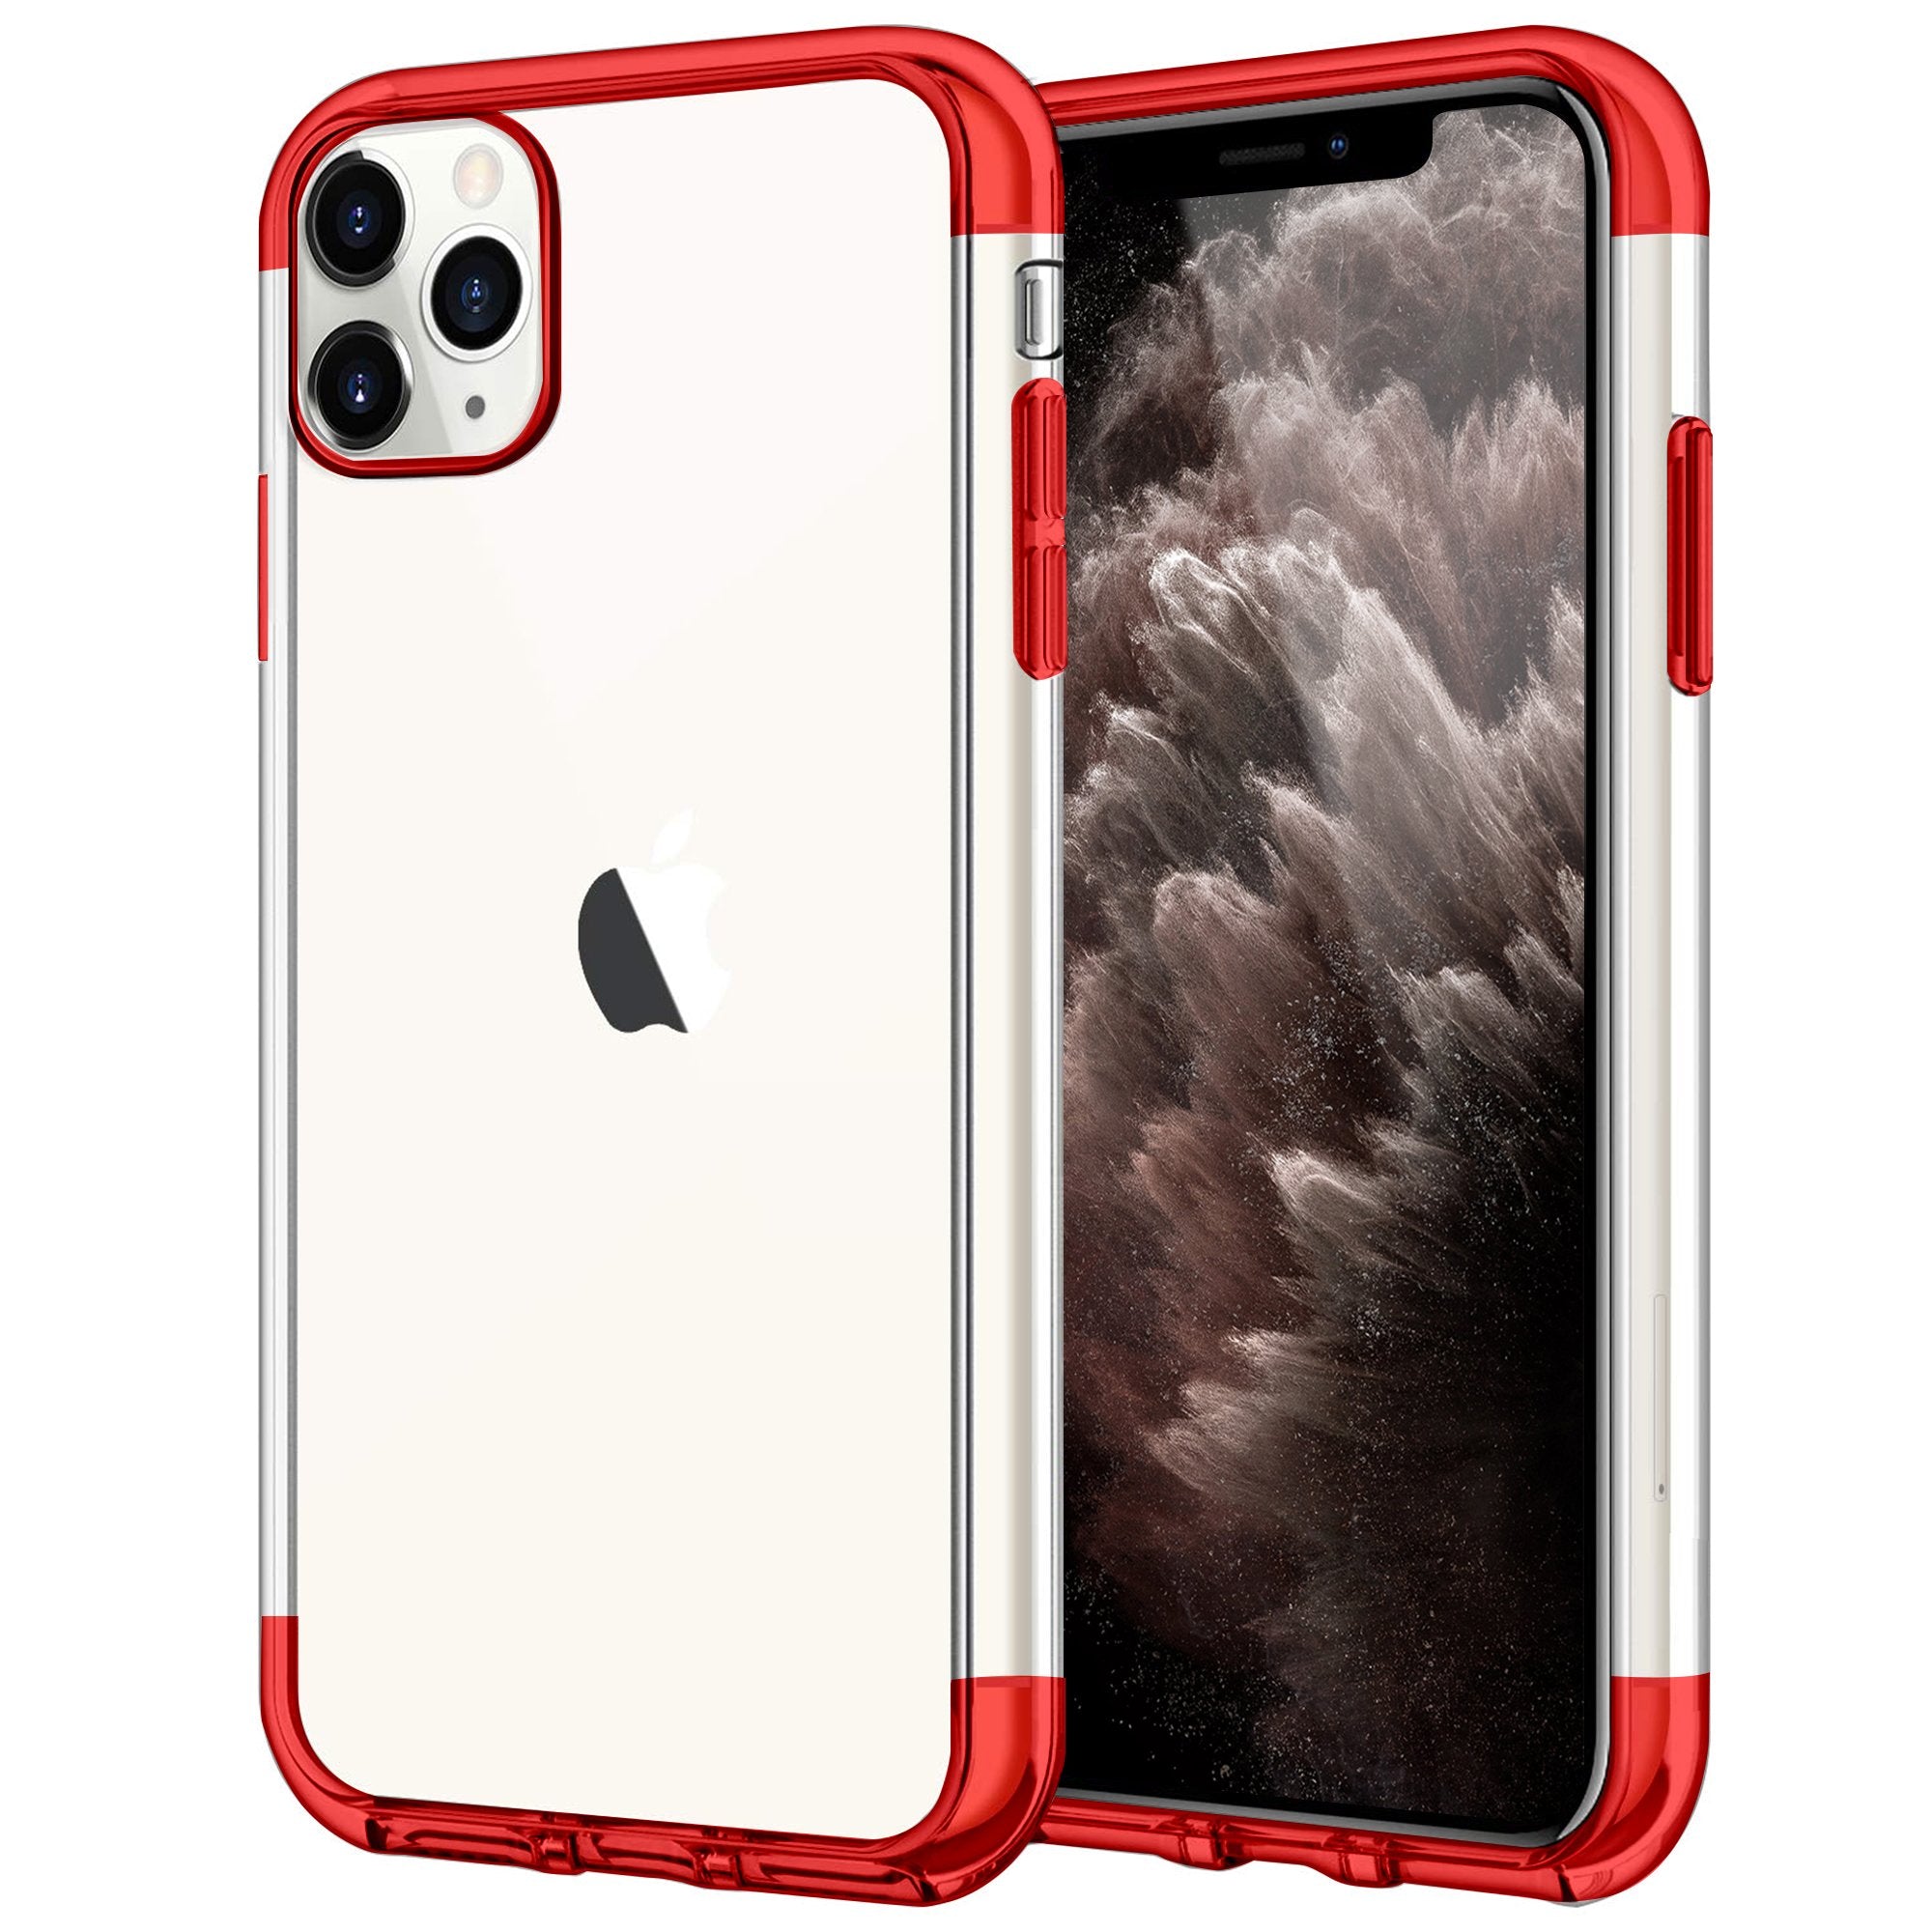 Case for iPhone 11 Pro Shock Proof Soft TPU Silicone Phone Clear Slim Cover